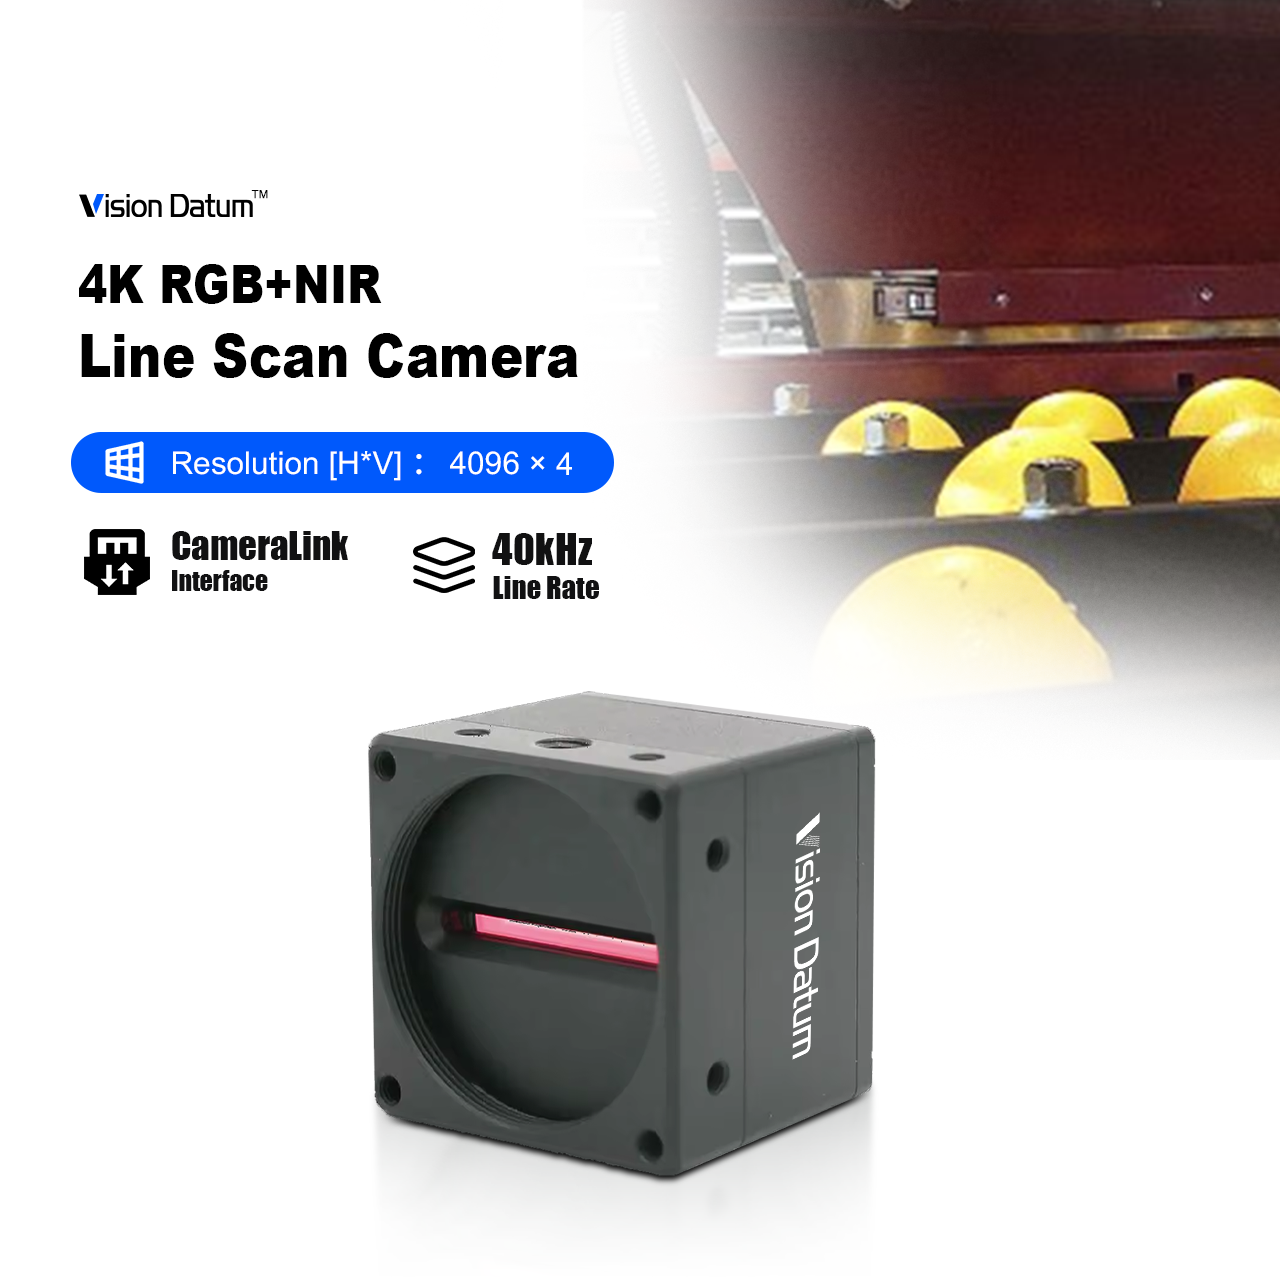 4k 40KHz Line Scan RGB Near Infrared Camera For Defect Detection